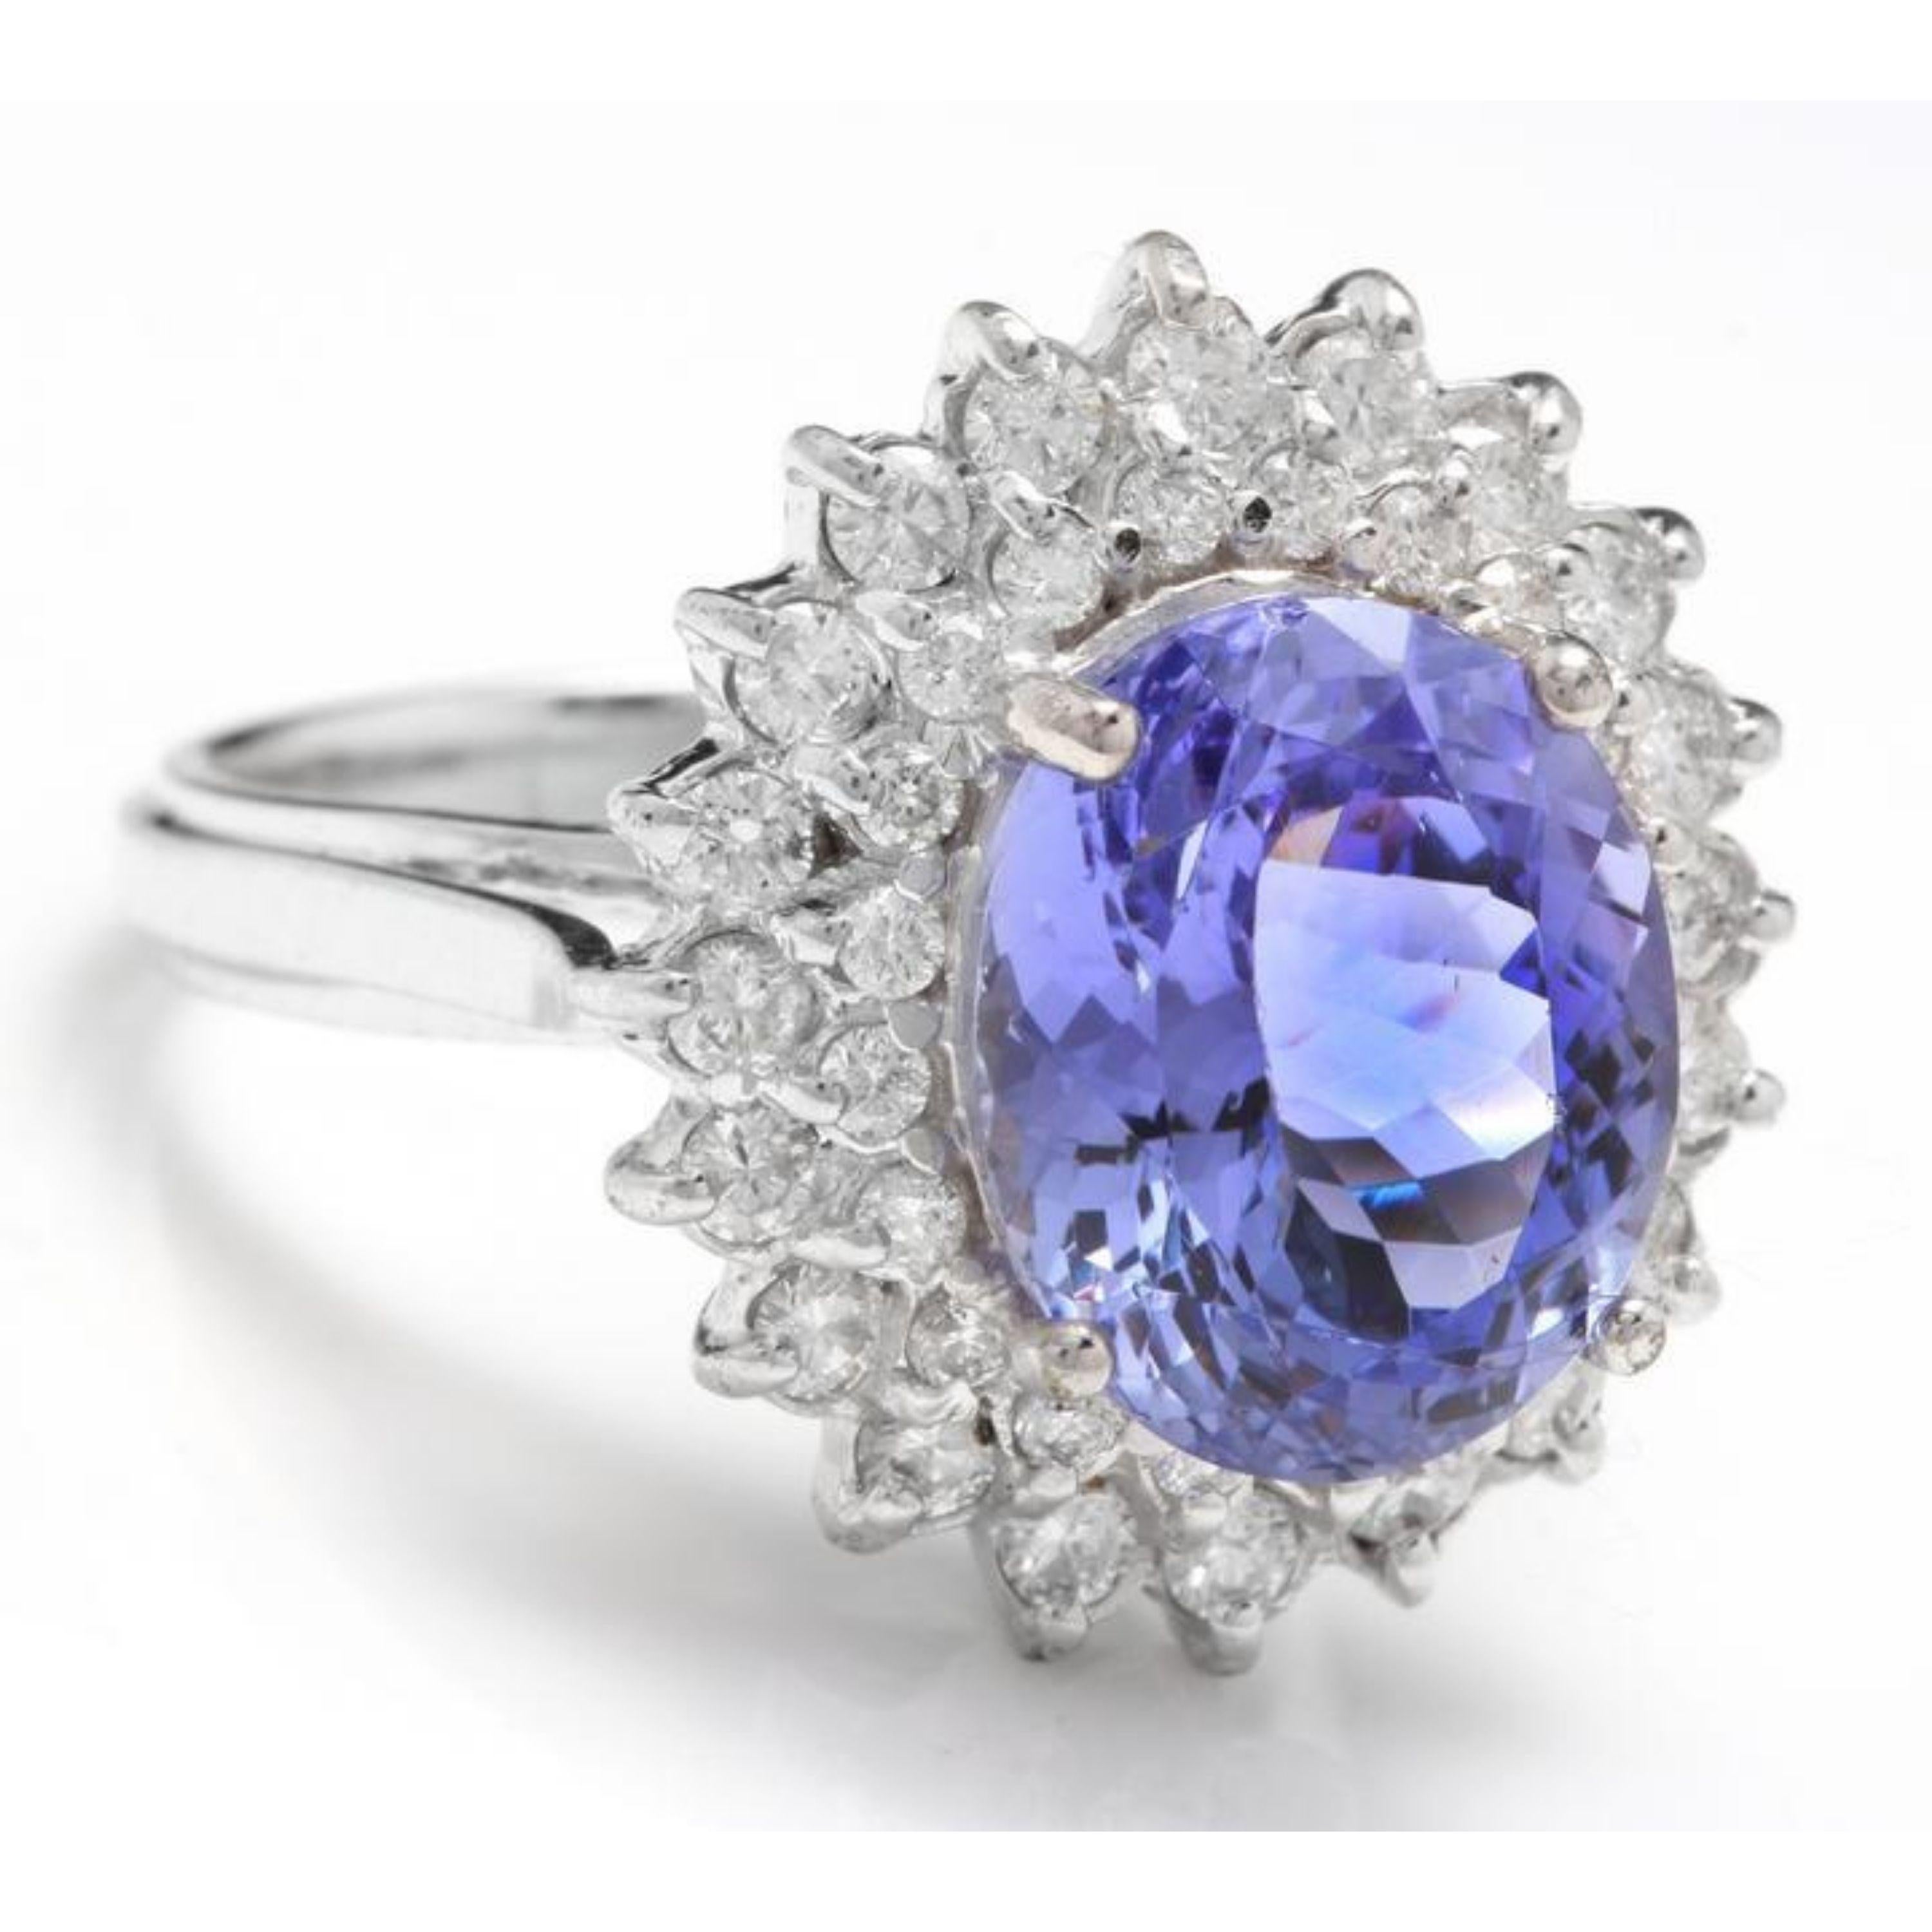 6.35 Carats Natural Very Nice Looking Tanzanite and Diamond 14K Solid White Gold Ring

Total Natural Oval Cut Tanzanite Weight is: Approx. 5.25 Carats

Tanzanite Measures: Approx. 12 x 10.00mm

Natural Round Diamonds Weight: Approx. 1.10 Carats